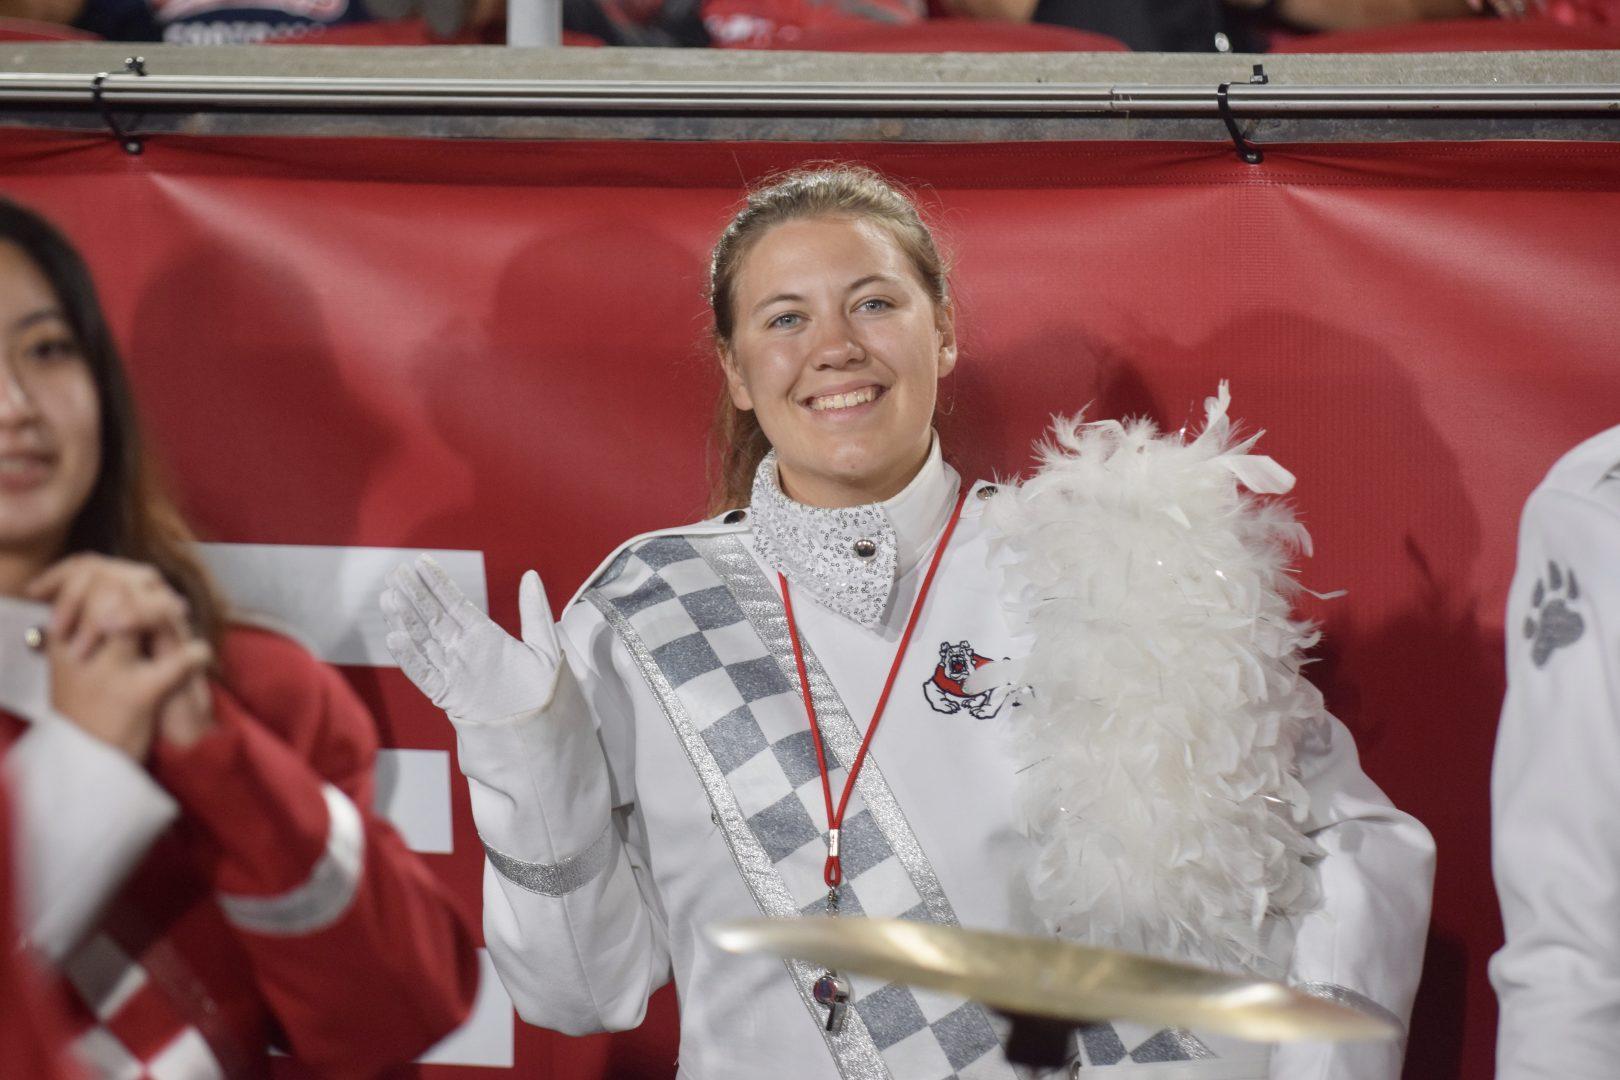 Assistant drum major Kristine Kemmer will travel with the Bulldog Marching Band to the Rose Parade in Pasadena for New Year’s and to Dublin, Ireland, for the annual St. Patrick’s Day Parade in March 2023. (Aidan Garaygordobil/The Collegian)